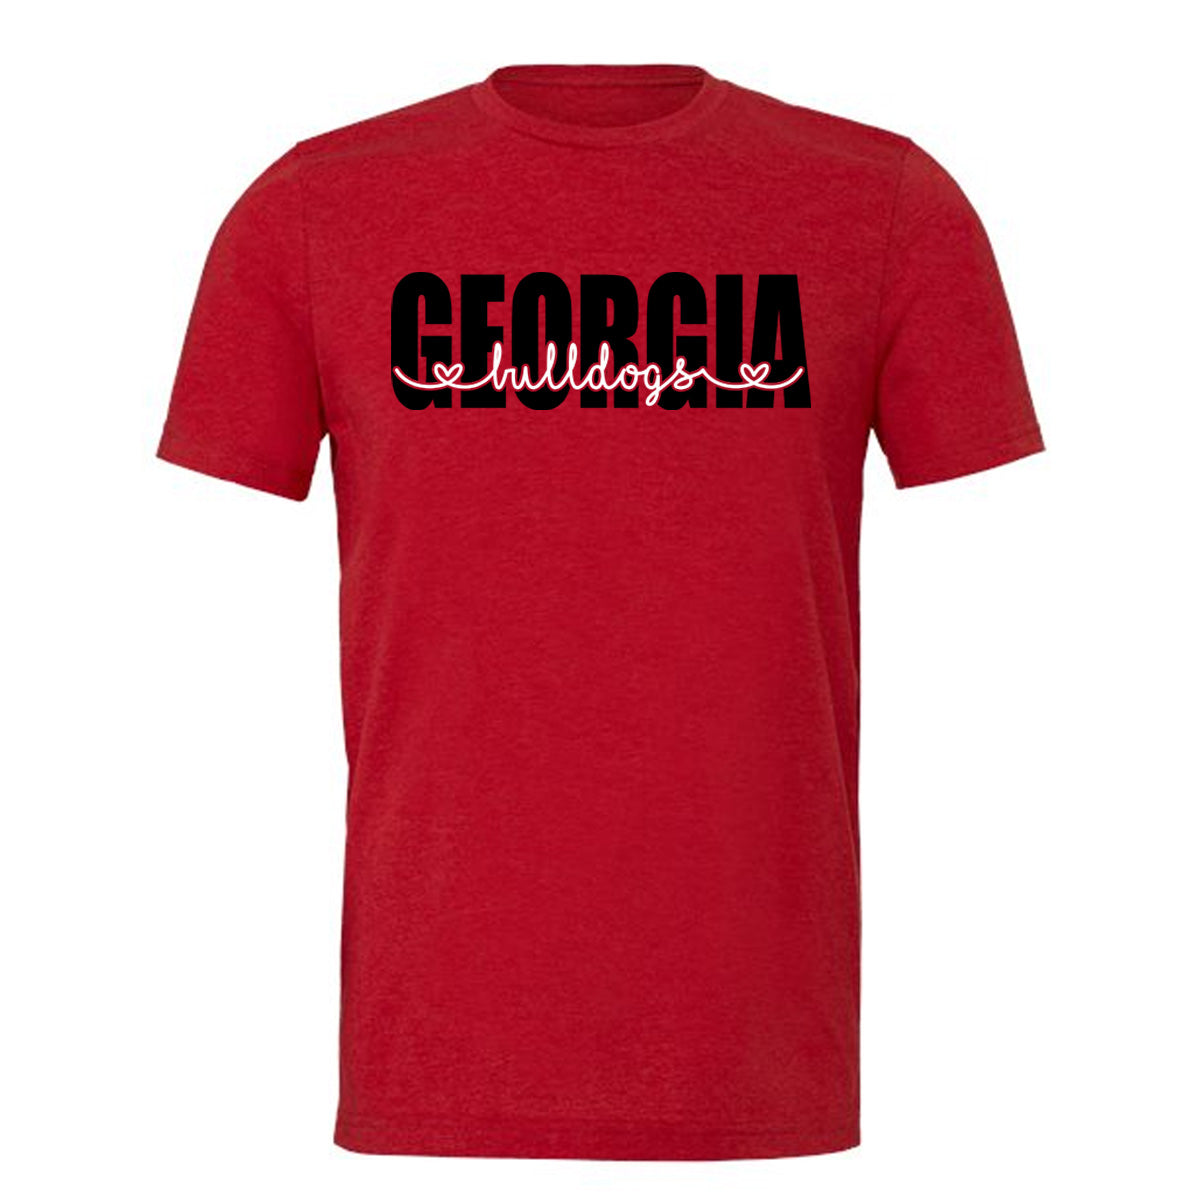 Georgia Bulldogs with Hearts - Heather Red Tee - Southern Grace Creations